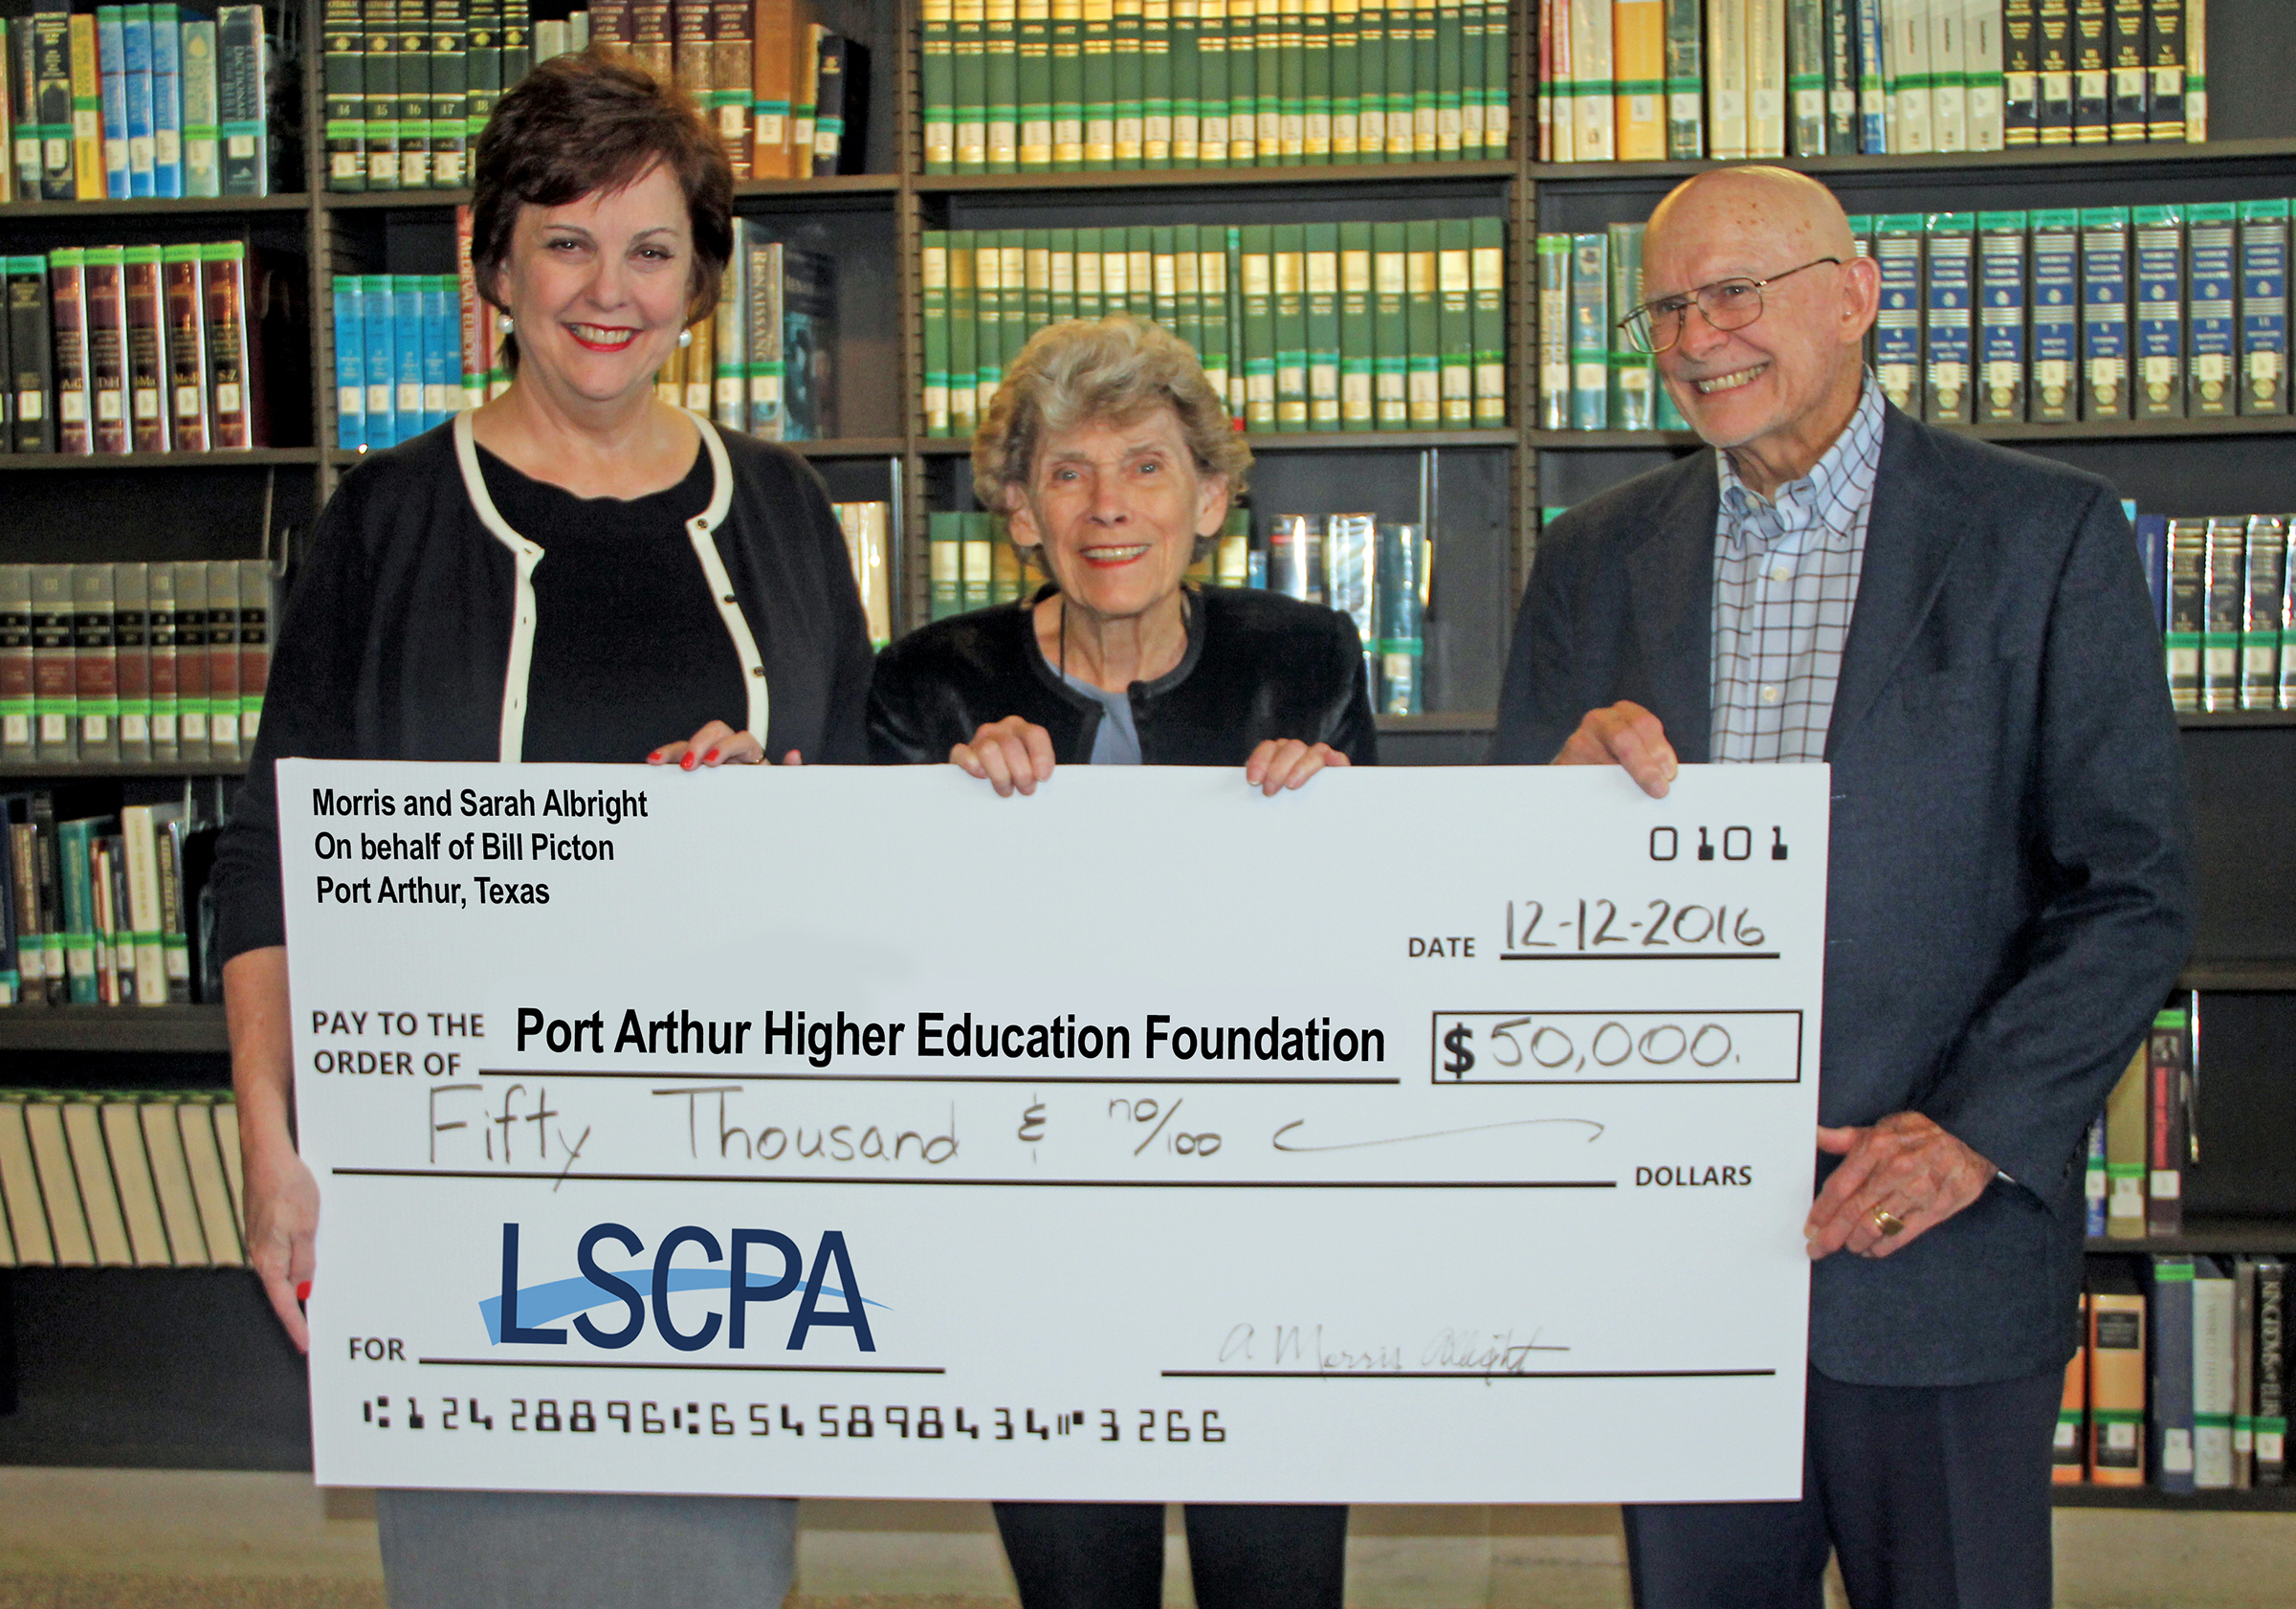 Dr. Reynard, Sarah Albright, and A. Morris Albright standing in library holding a large check to LSCPA in the amount of 50,000